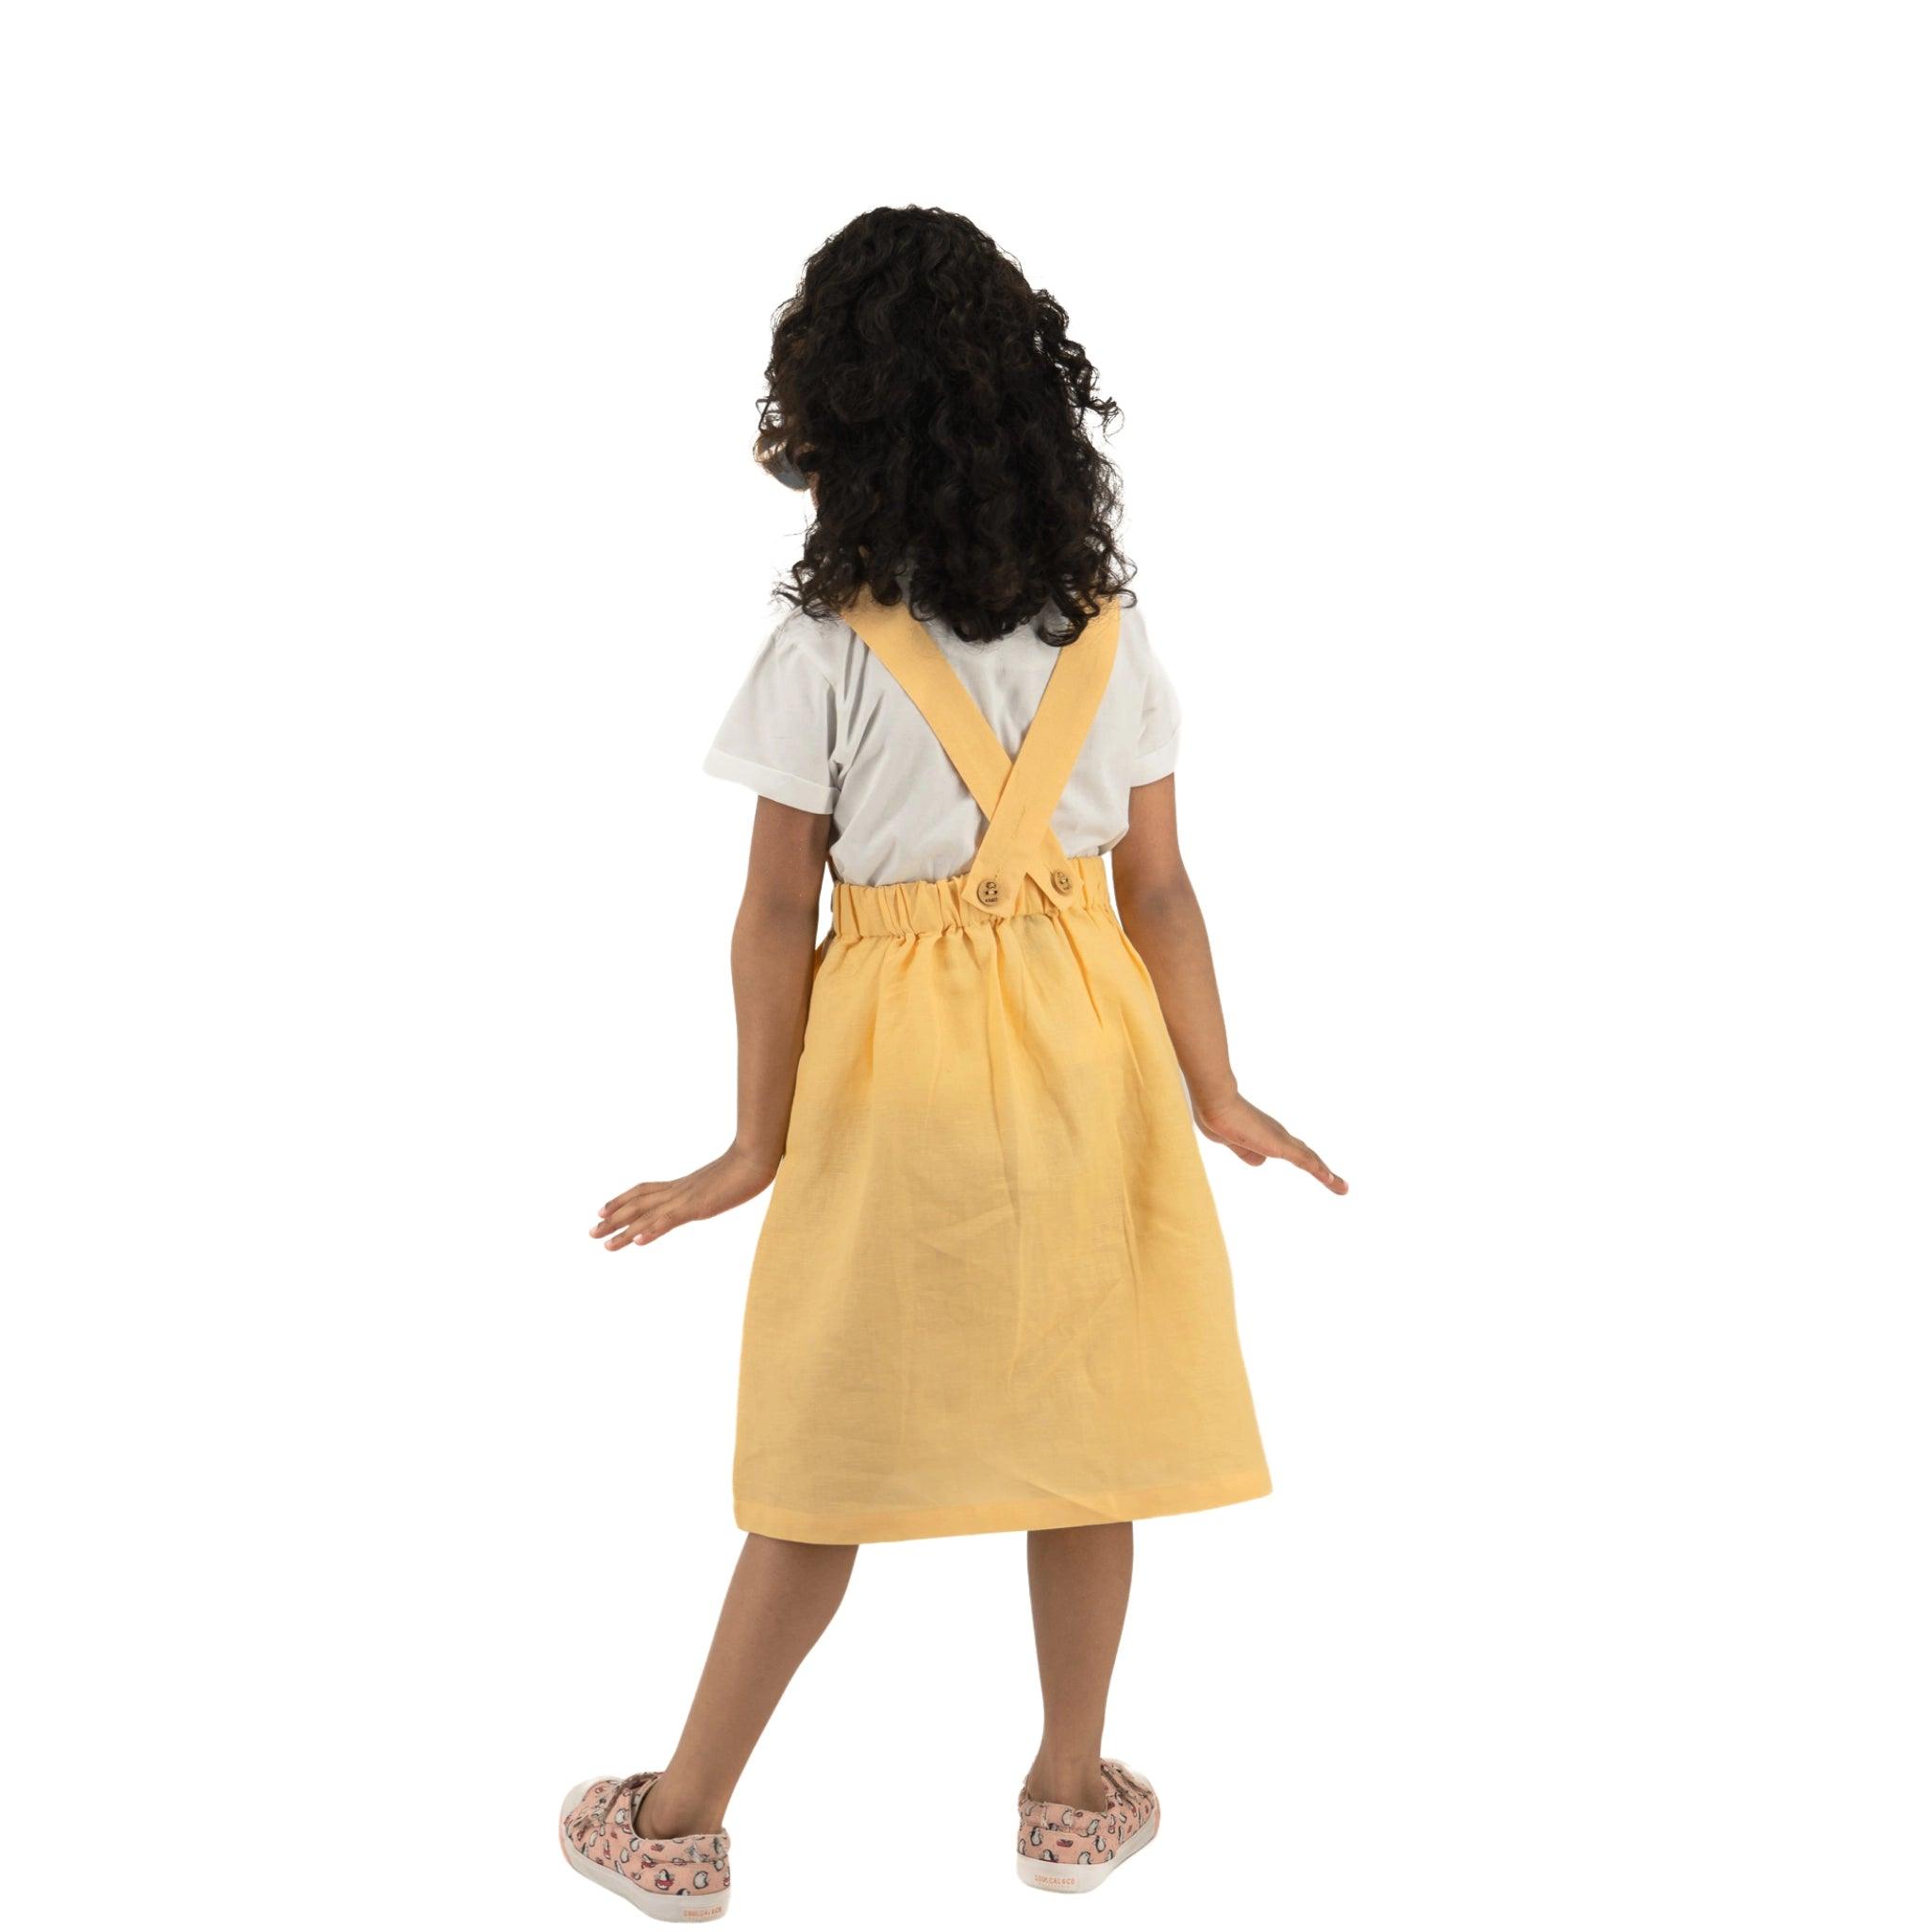 A young girl in a yellow Golden Fleece Linen Pinafore and white shirt walks away, viewed from behind, against a white background.